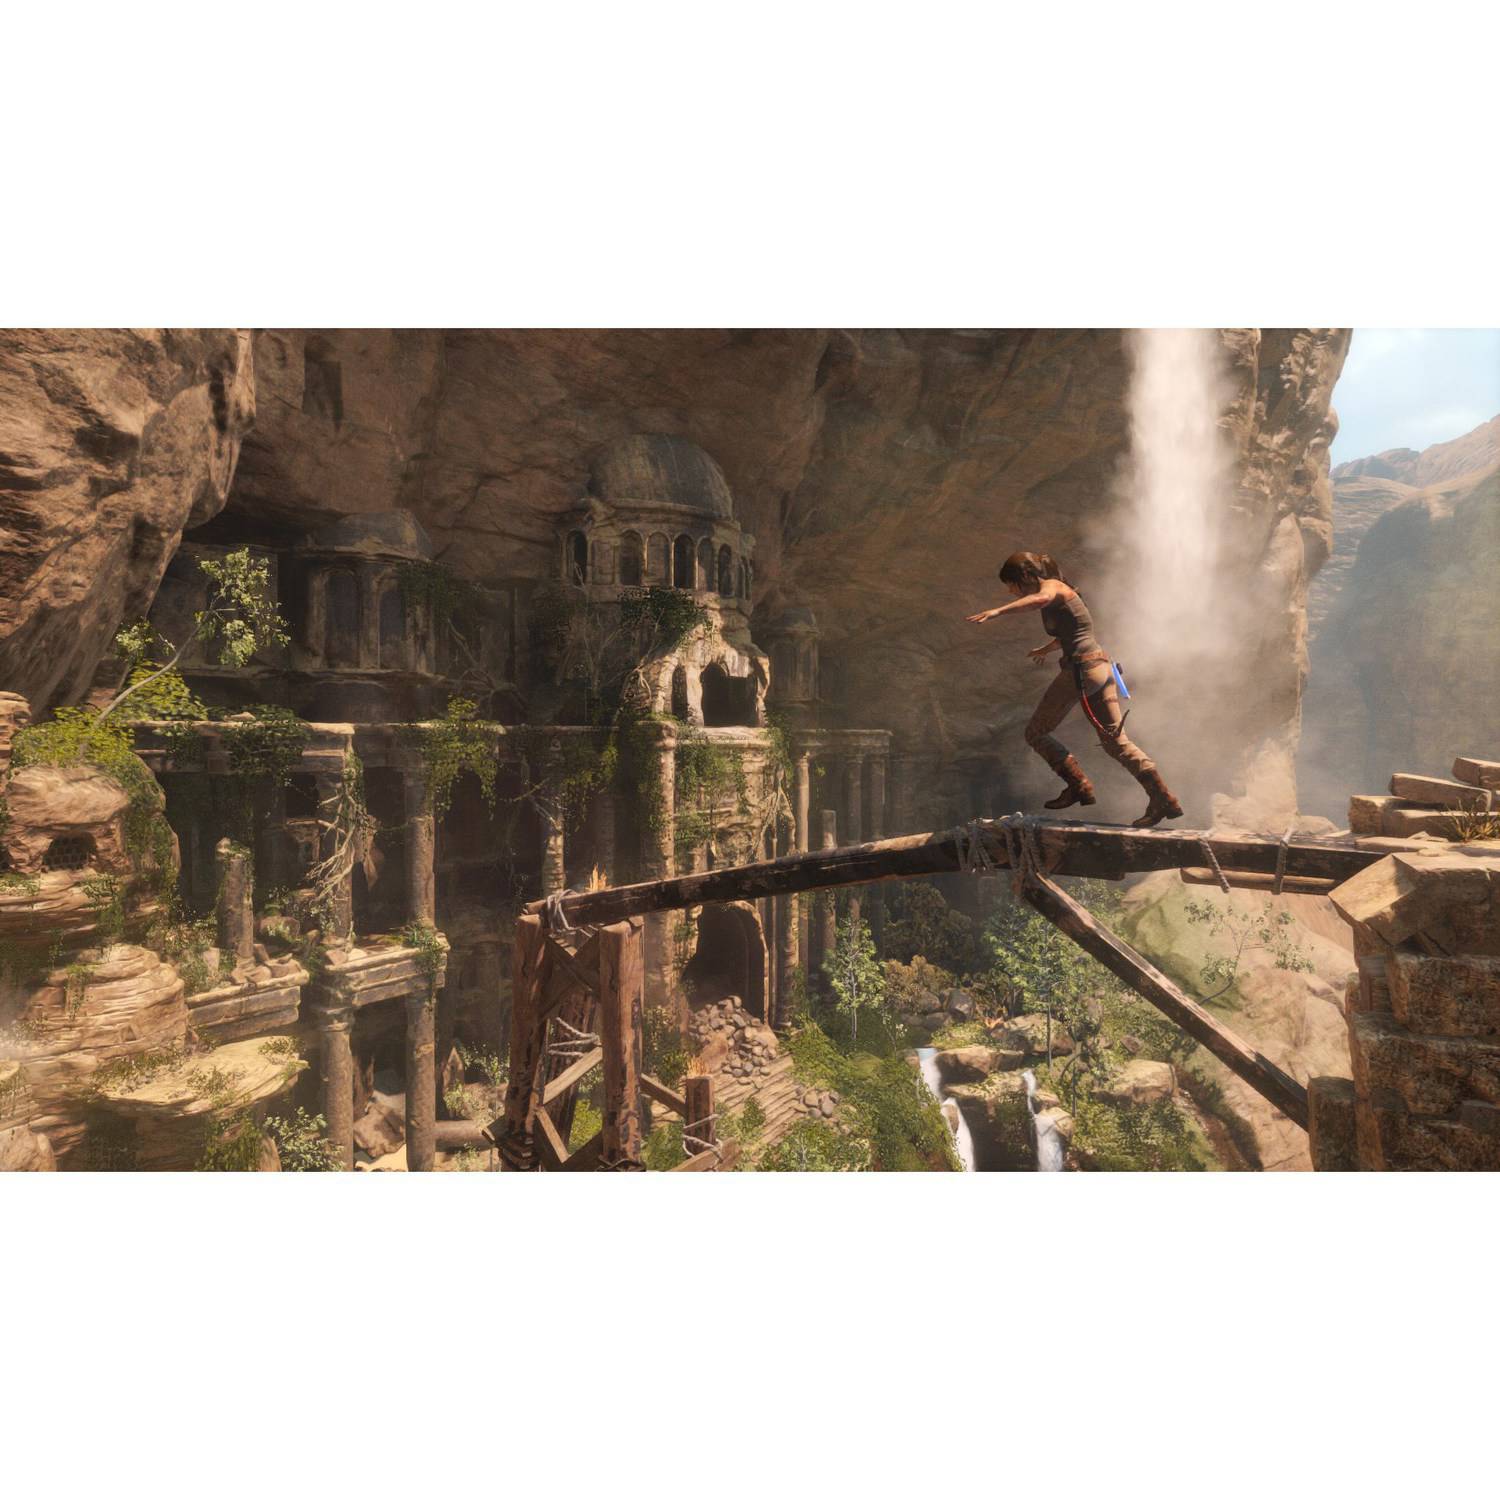 Rise of the Tomb Raider, Microsoft, Xbox 360, 885370982251 - image 3 of 11